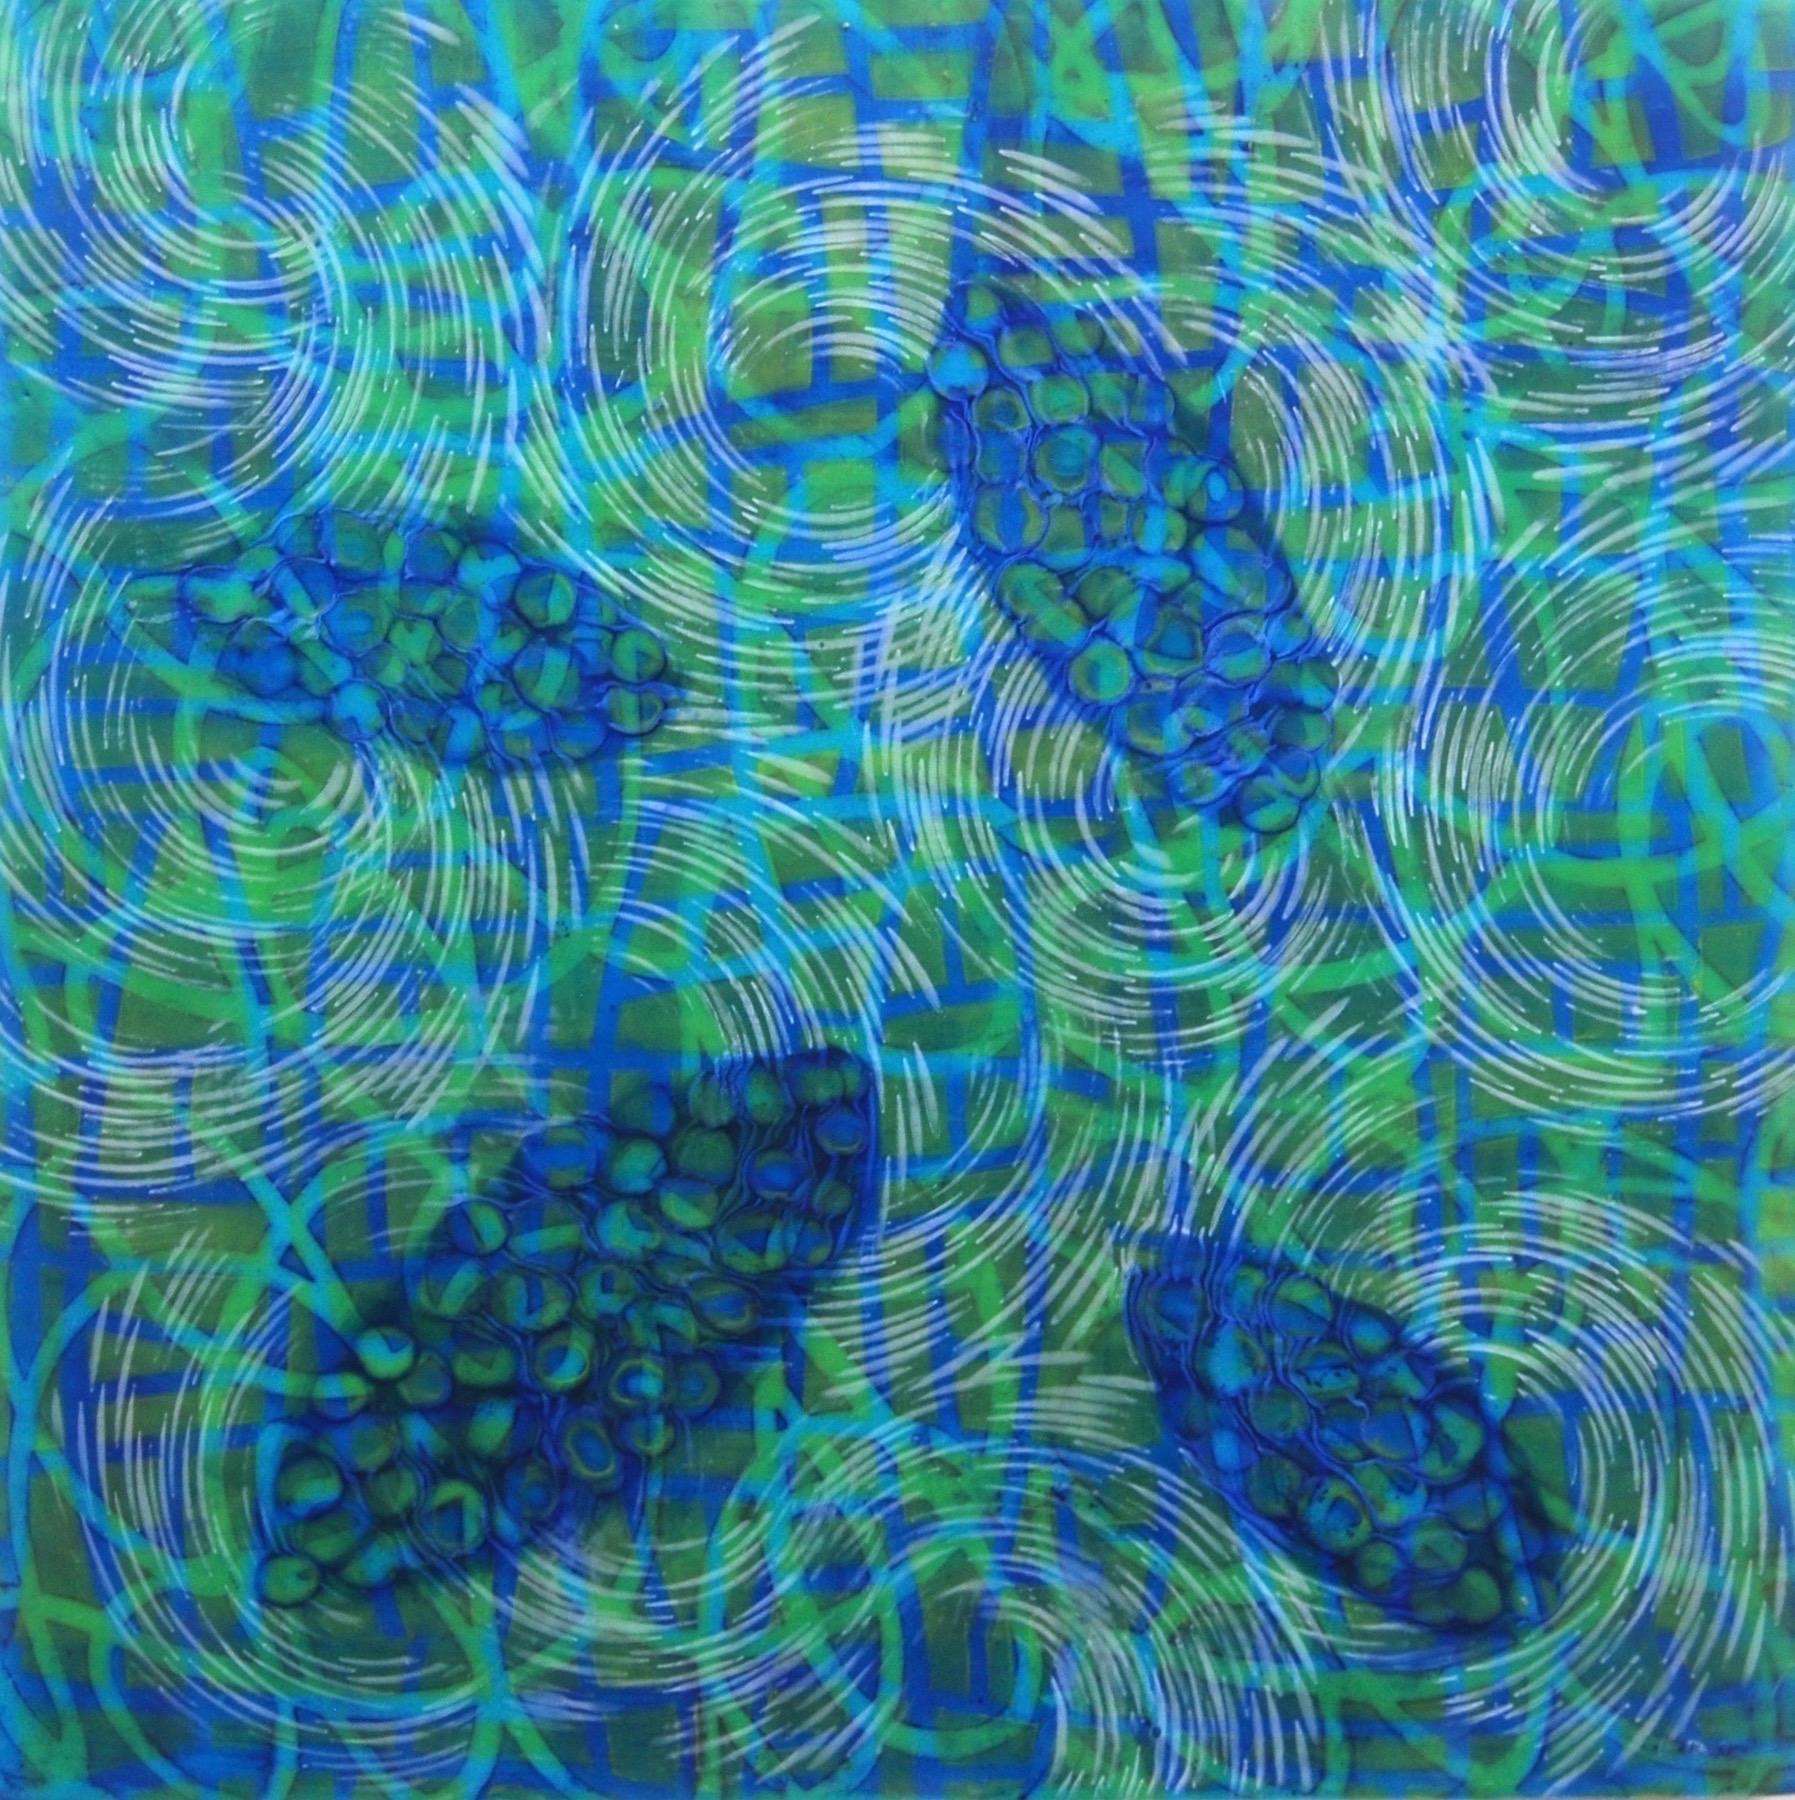 "Bio Patterns 13", abstract, encaustic, microscopic, blues, greens, turquoise